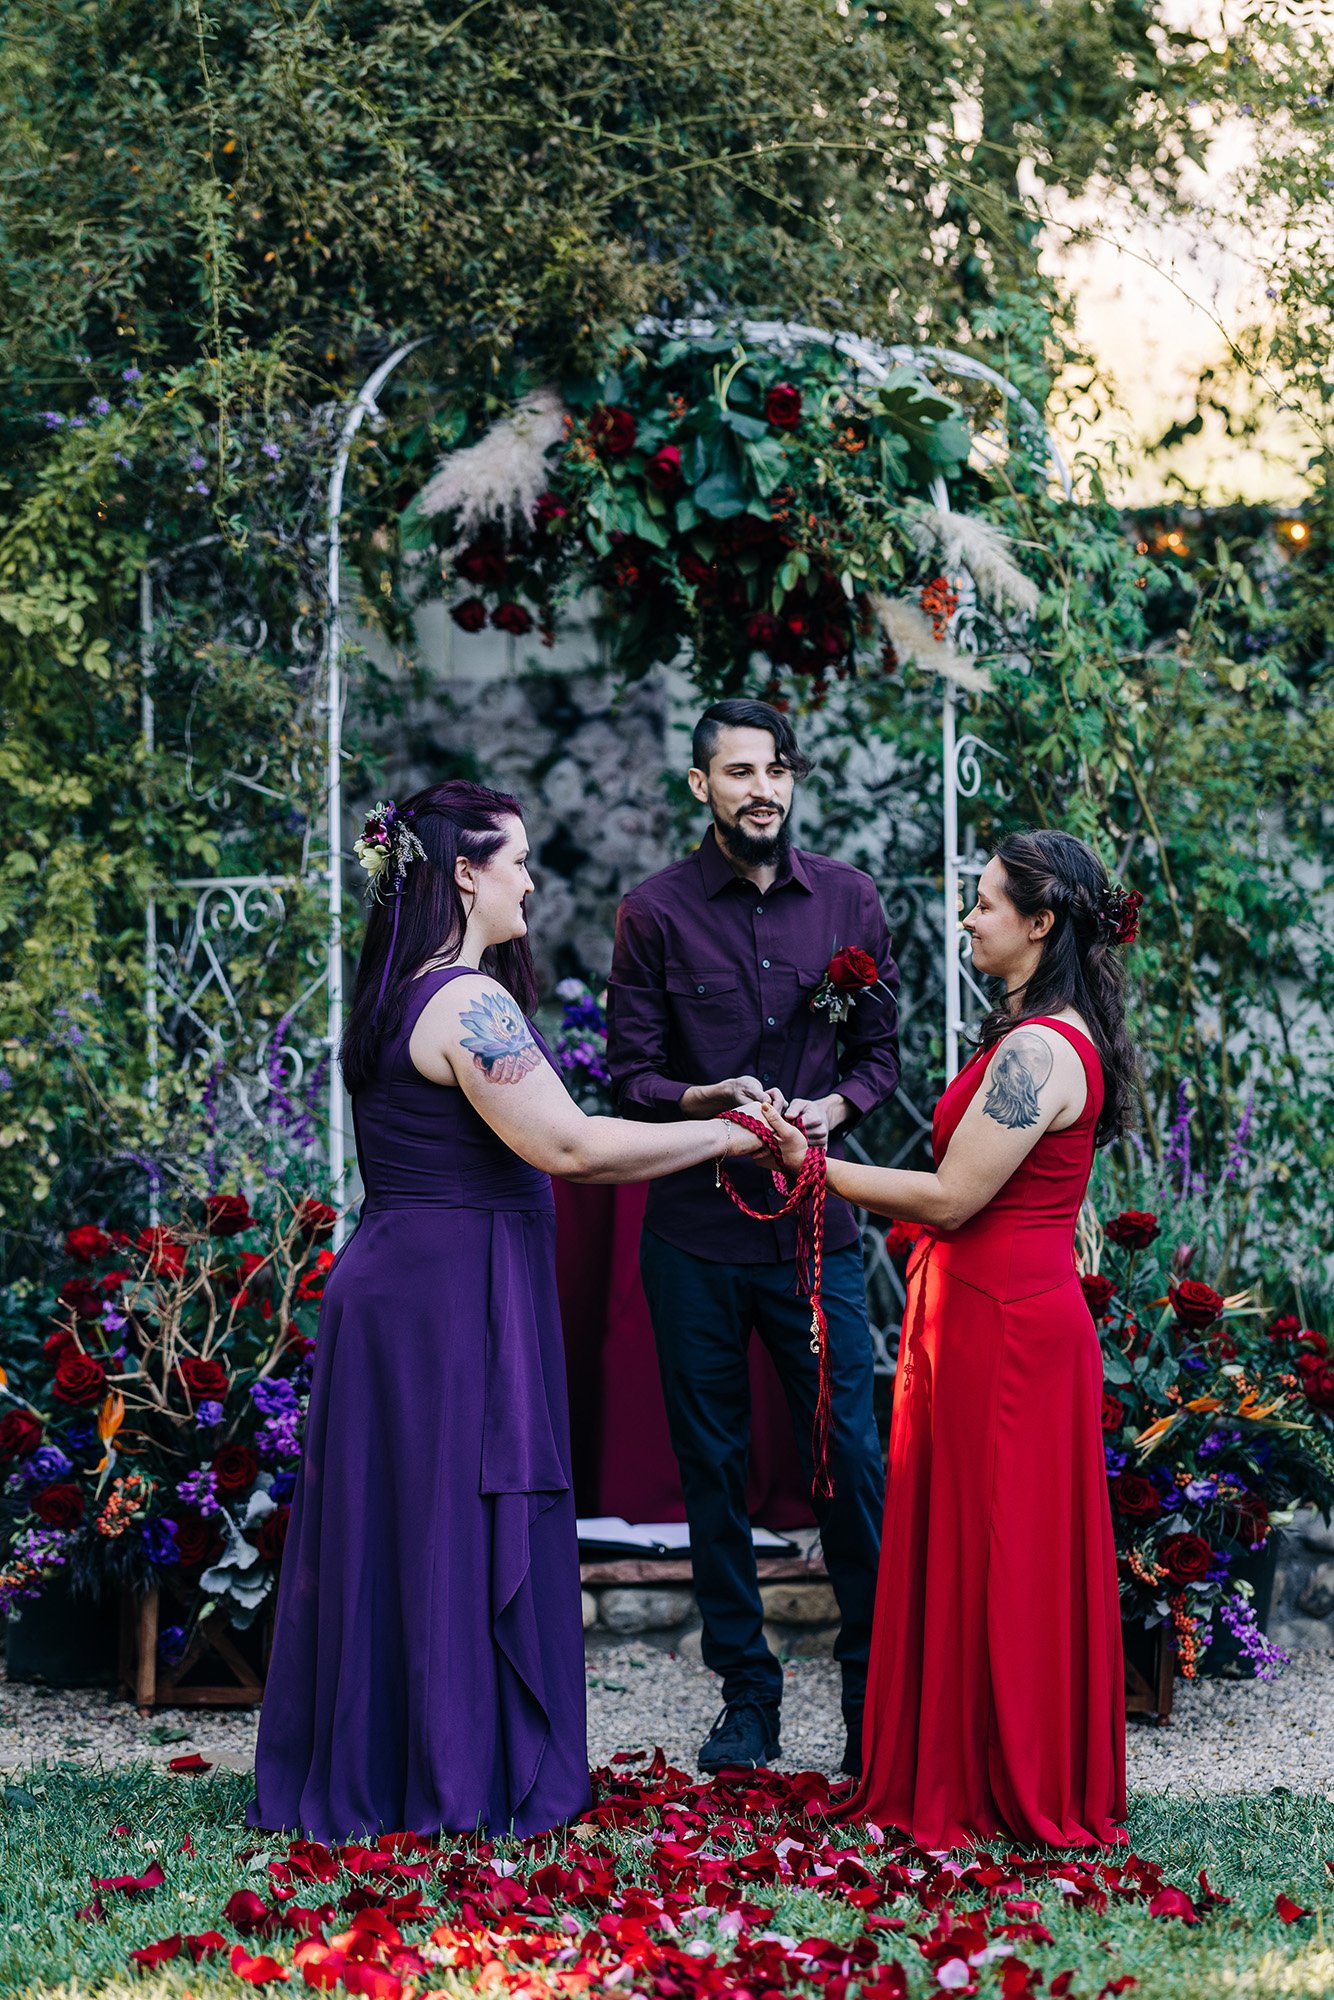 Our wedding officiant, Isiah, wraps a red cord around Heather and Veronica's hands during their wedding day.